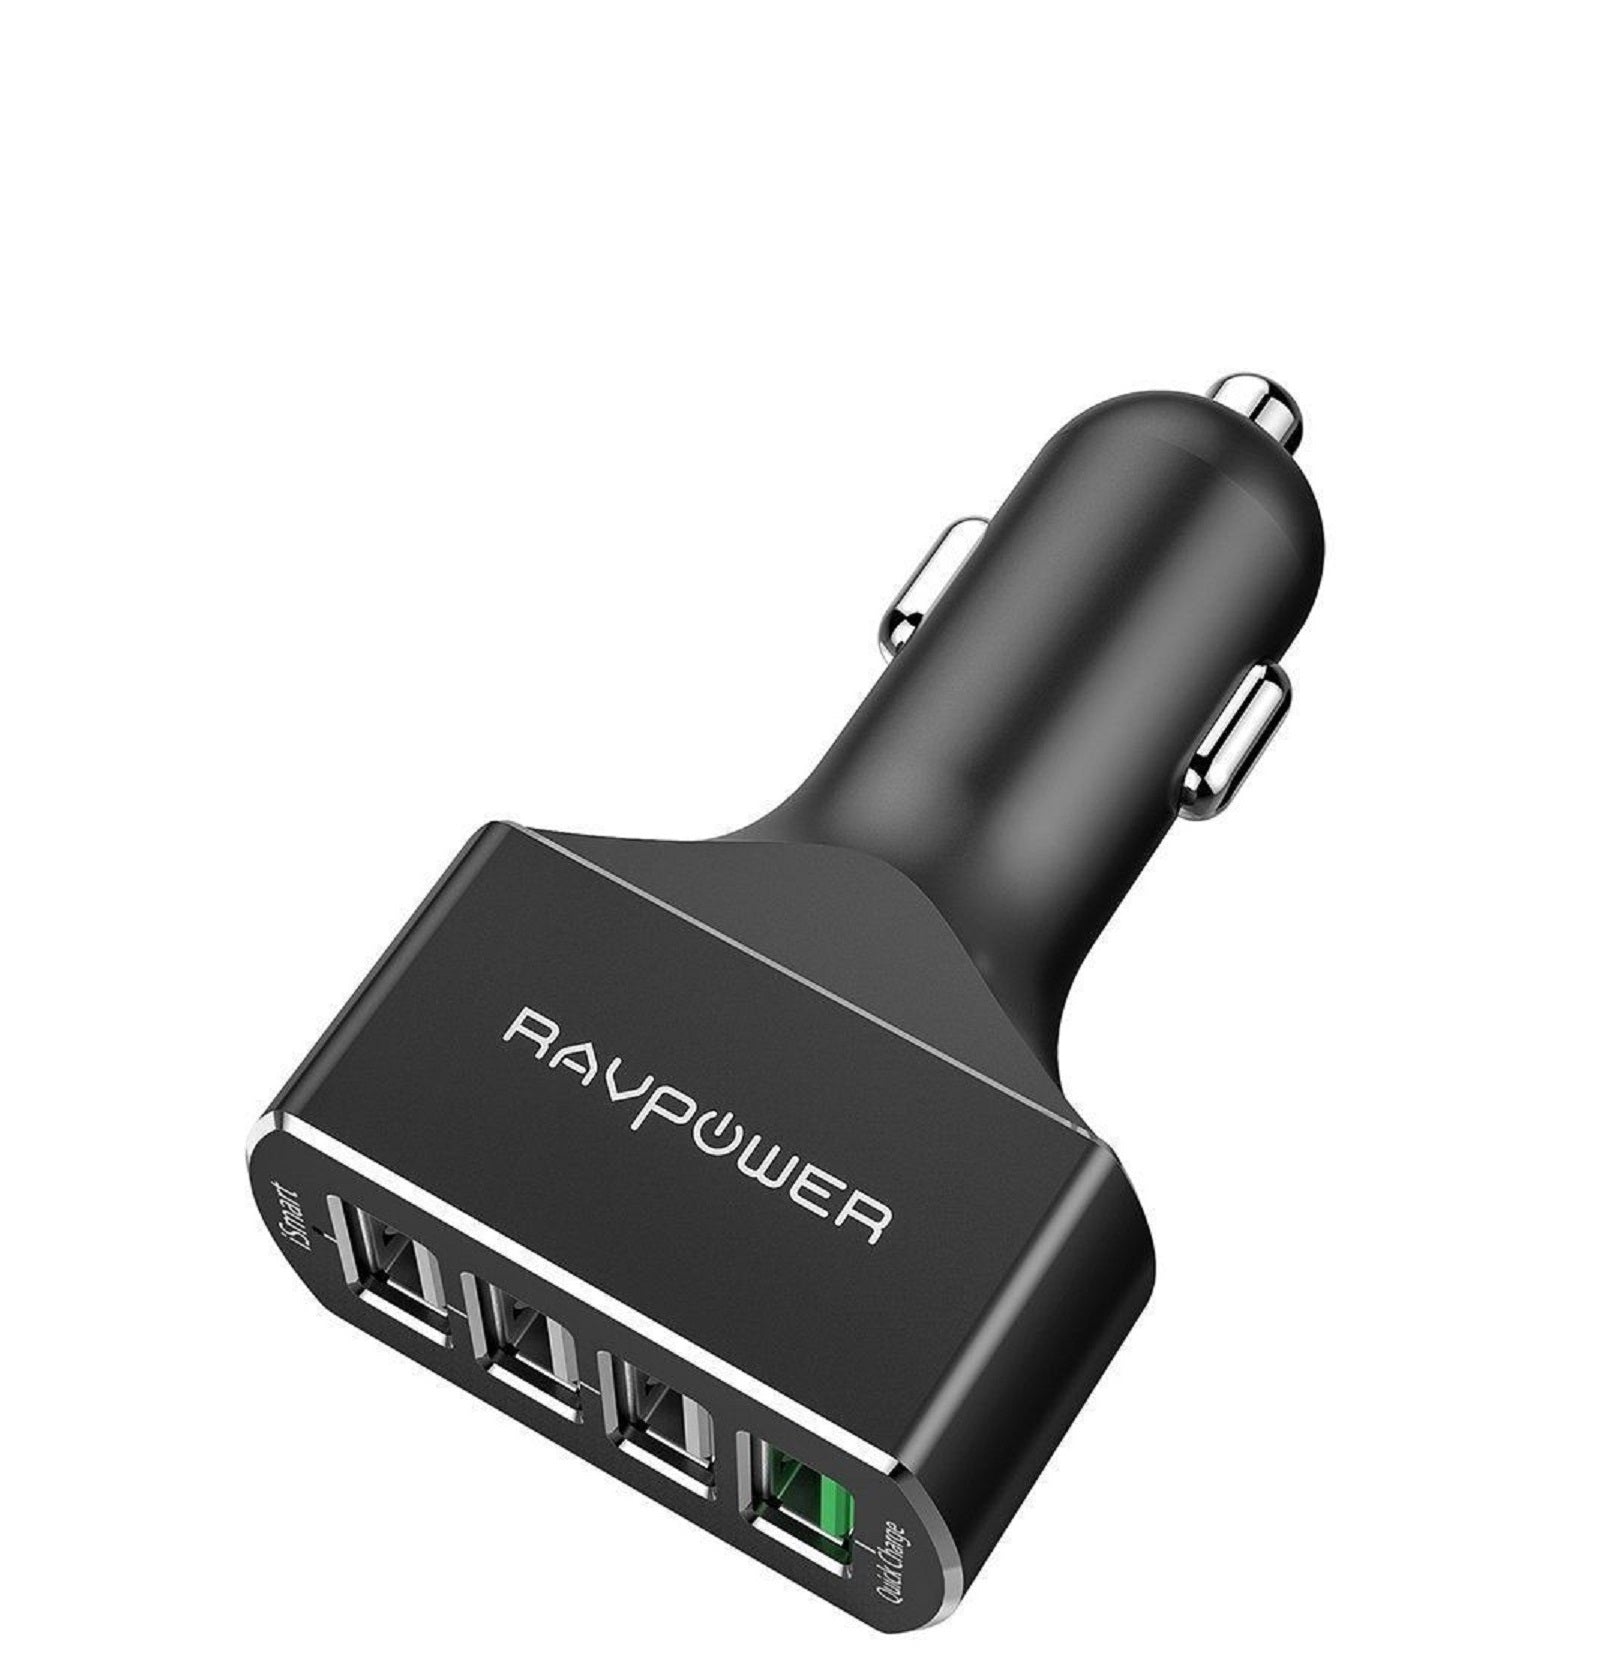 https://caserace.net/products/ravpower-4-ports-usb-quick-charge-3-0-car-charger-54w-4-port-car-adapter-rp-vc003